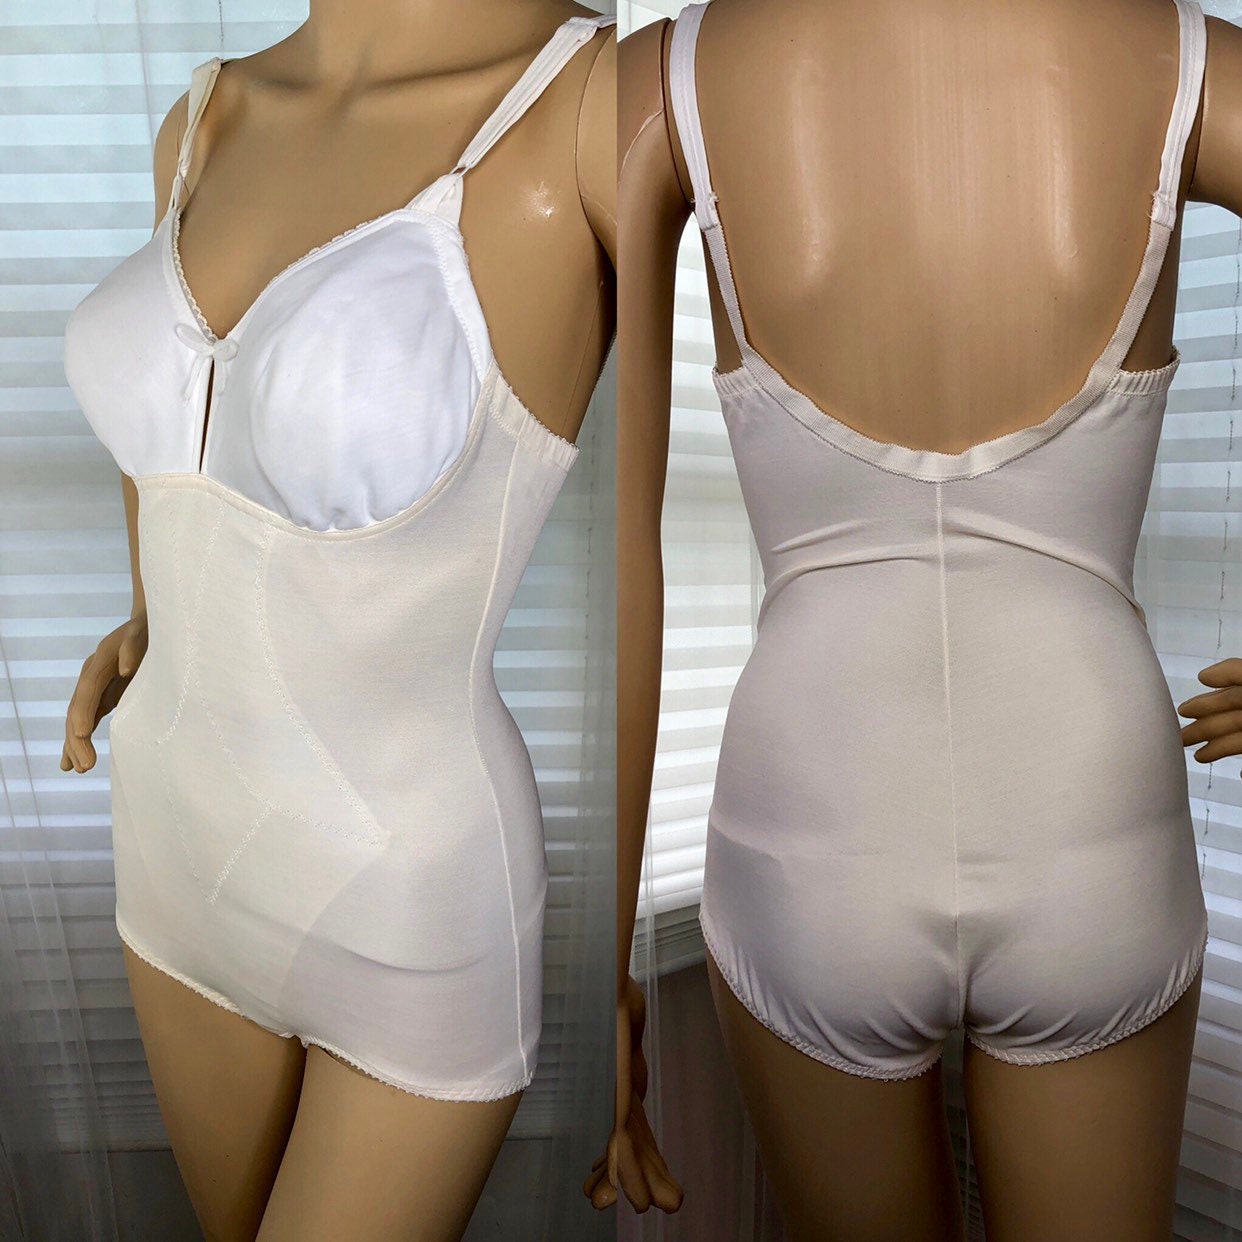 Vintage Slip Style Body Shaper by Subract Size Small 34B on eBid